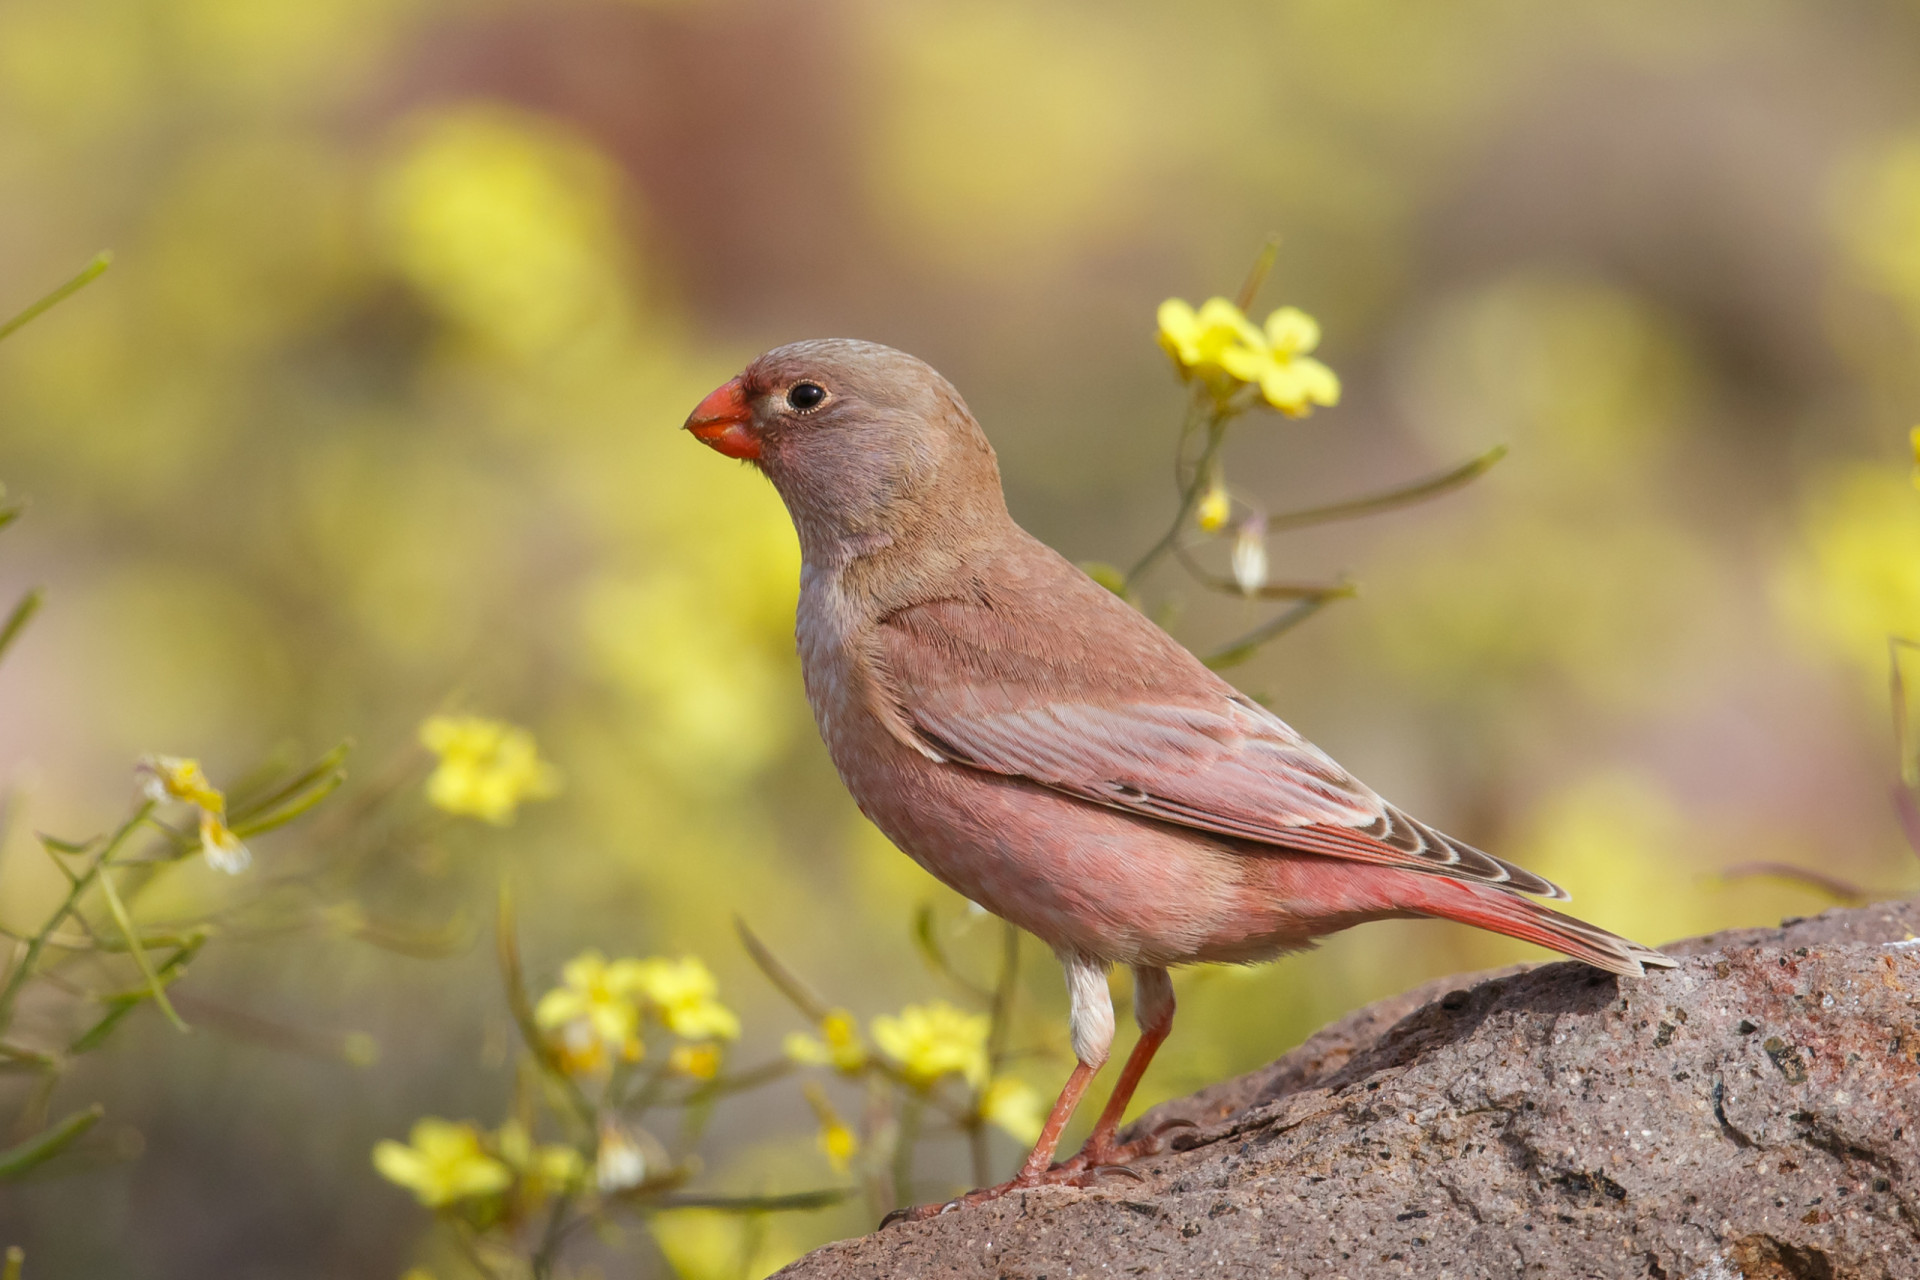 <p>A desert species found in North Africa and Spain through to southern Asia, the trumpeter finch is so named because its song is a buzzing nasal trill, rather like that produced by a tin trumpet.</p><p><a href="https://www.msn.com/en-us/community/channel/vid-7xx8mnucu55yw63we9va2gwr7uihbxwc68fxqp25x6tg4ftibpra?cvid=94631541bc0f4f89bfd59158d696ad7e">Follow us and access great exclusive content every day</a></p>